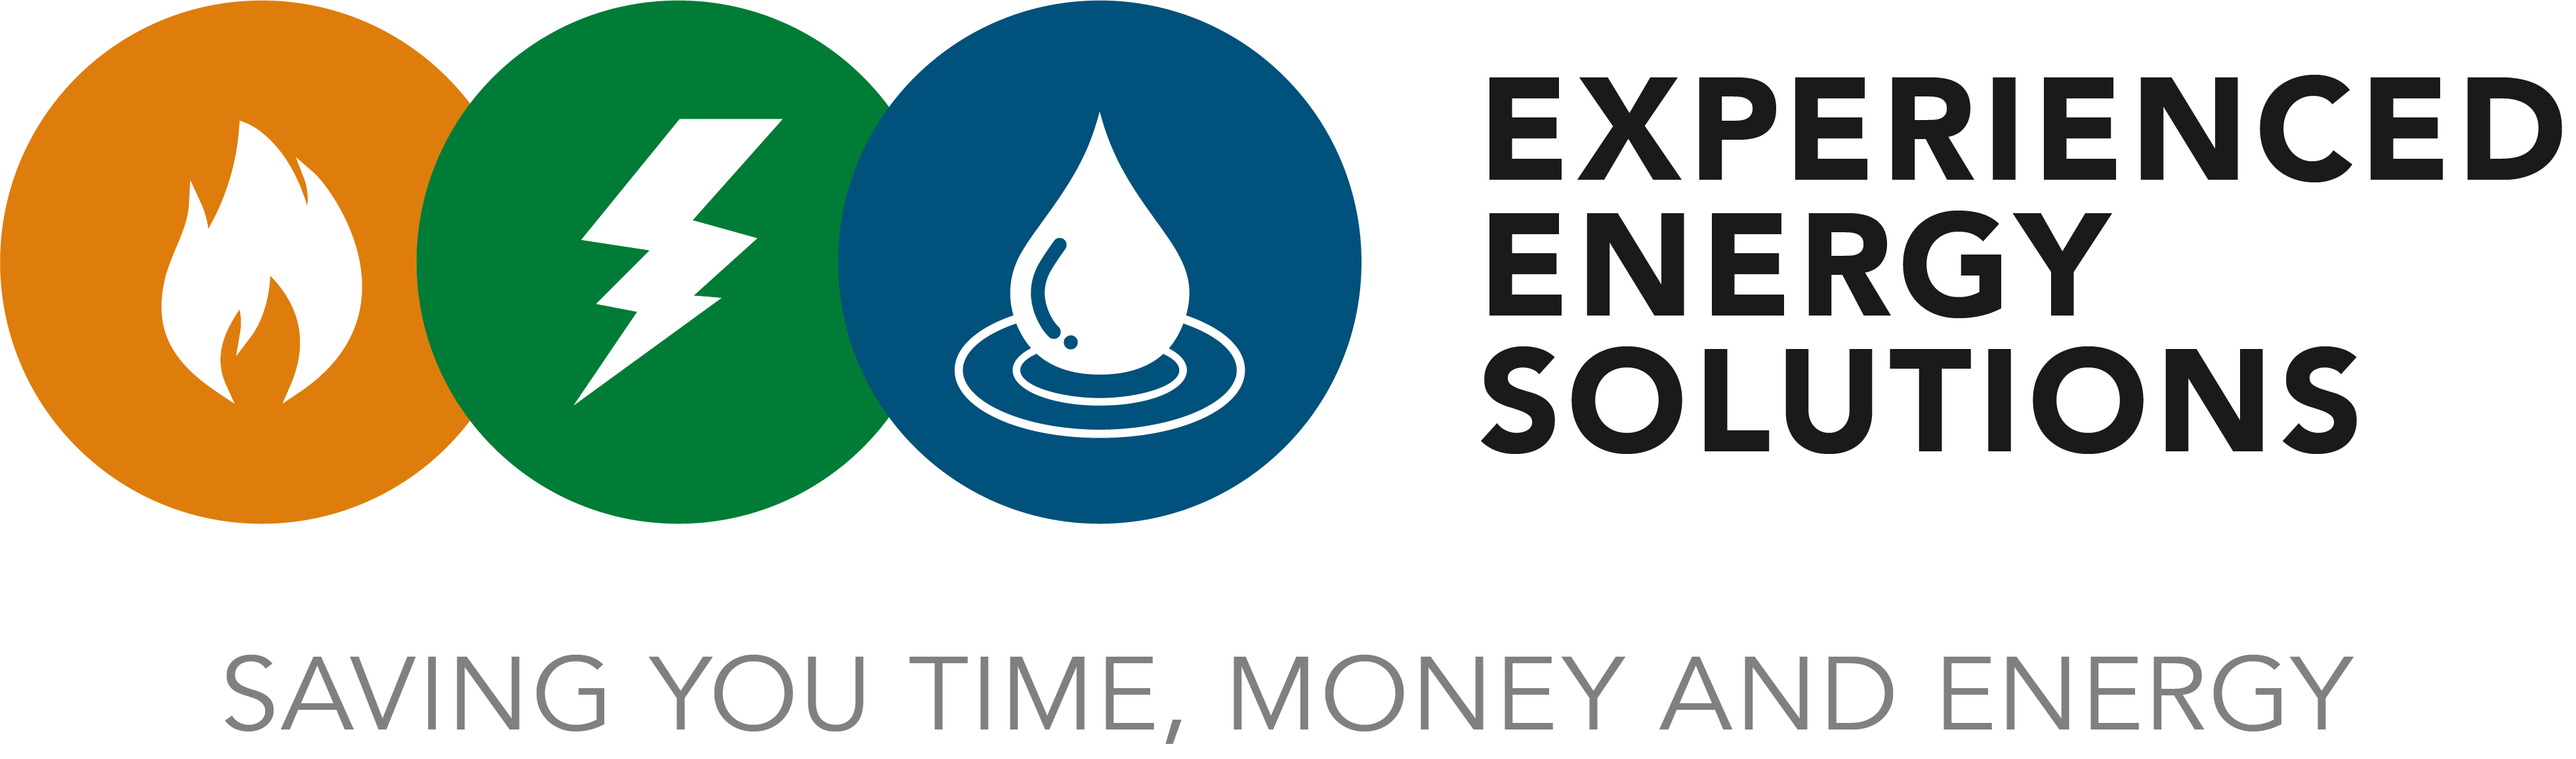 Experienced Energy Solutions Icon